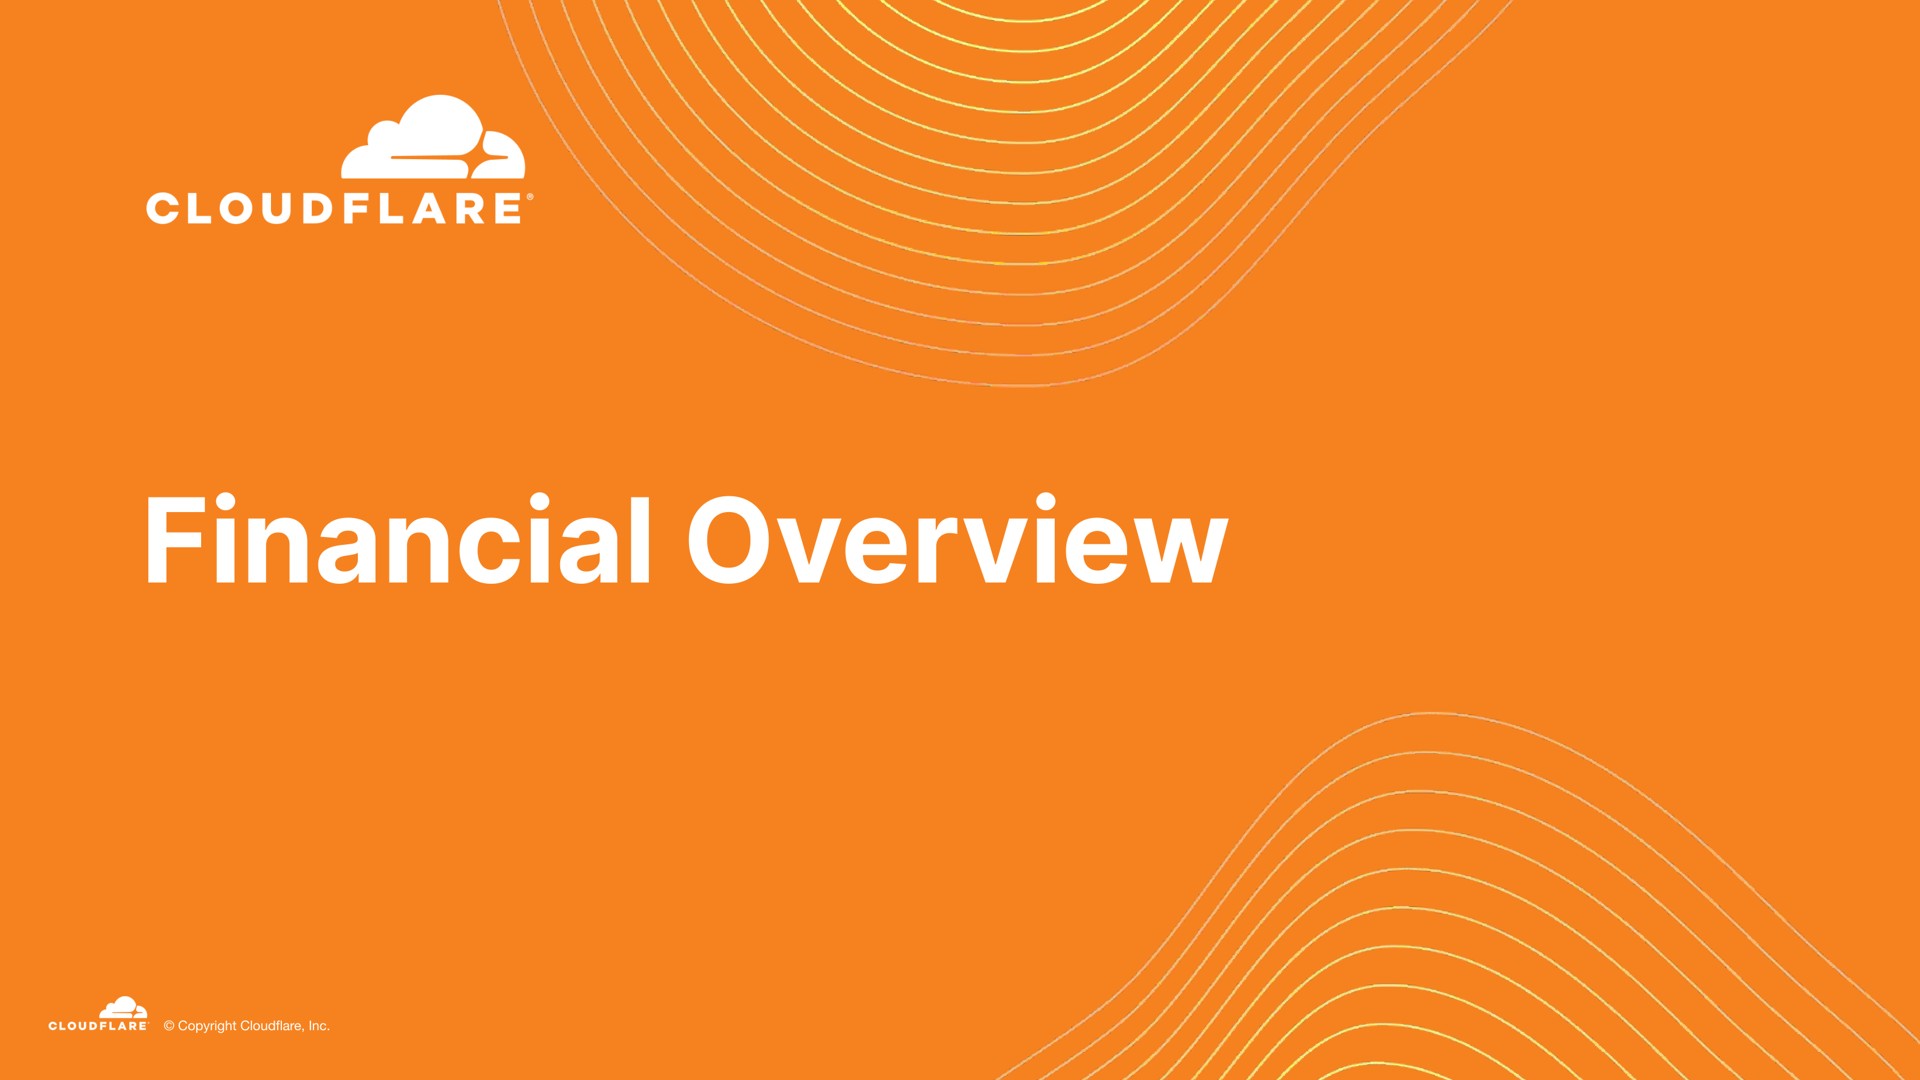 financial overview | Cloudflare